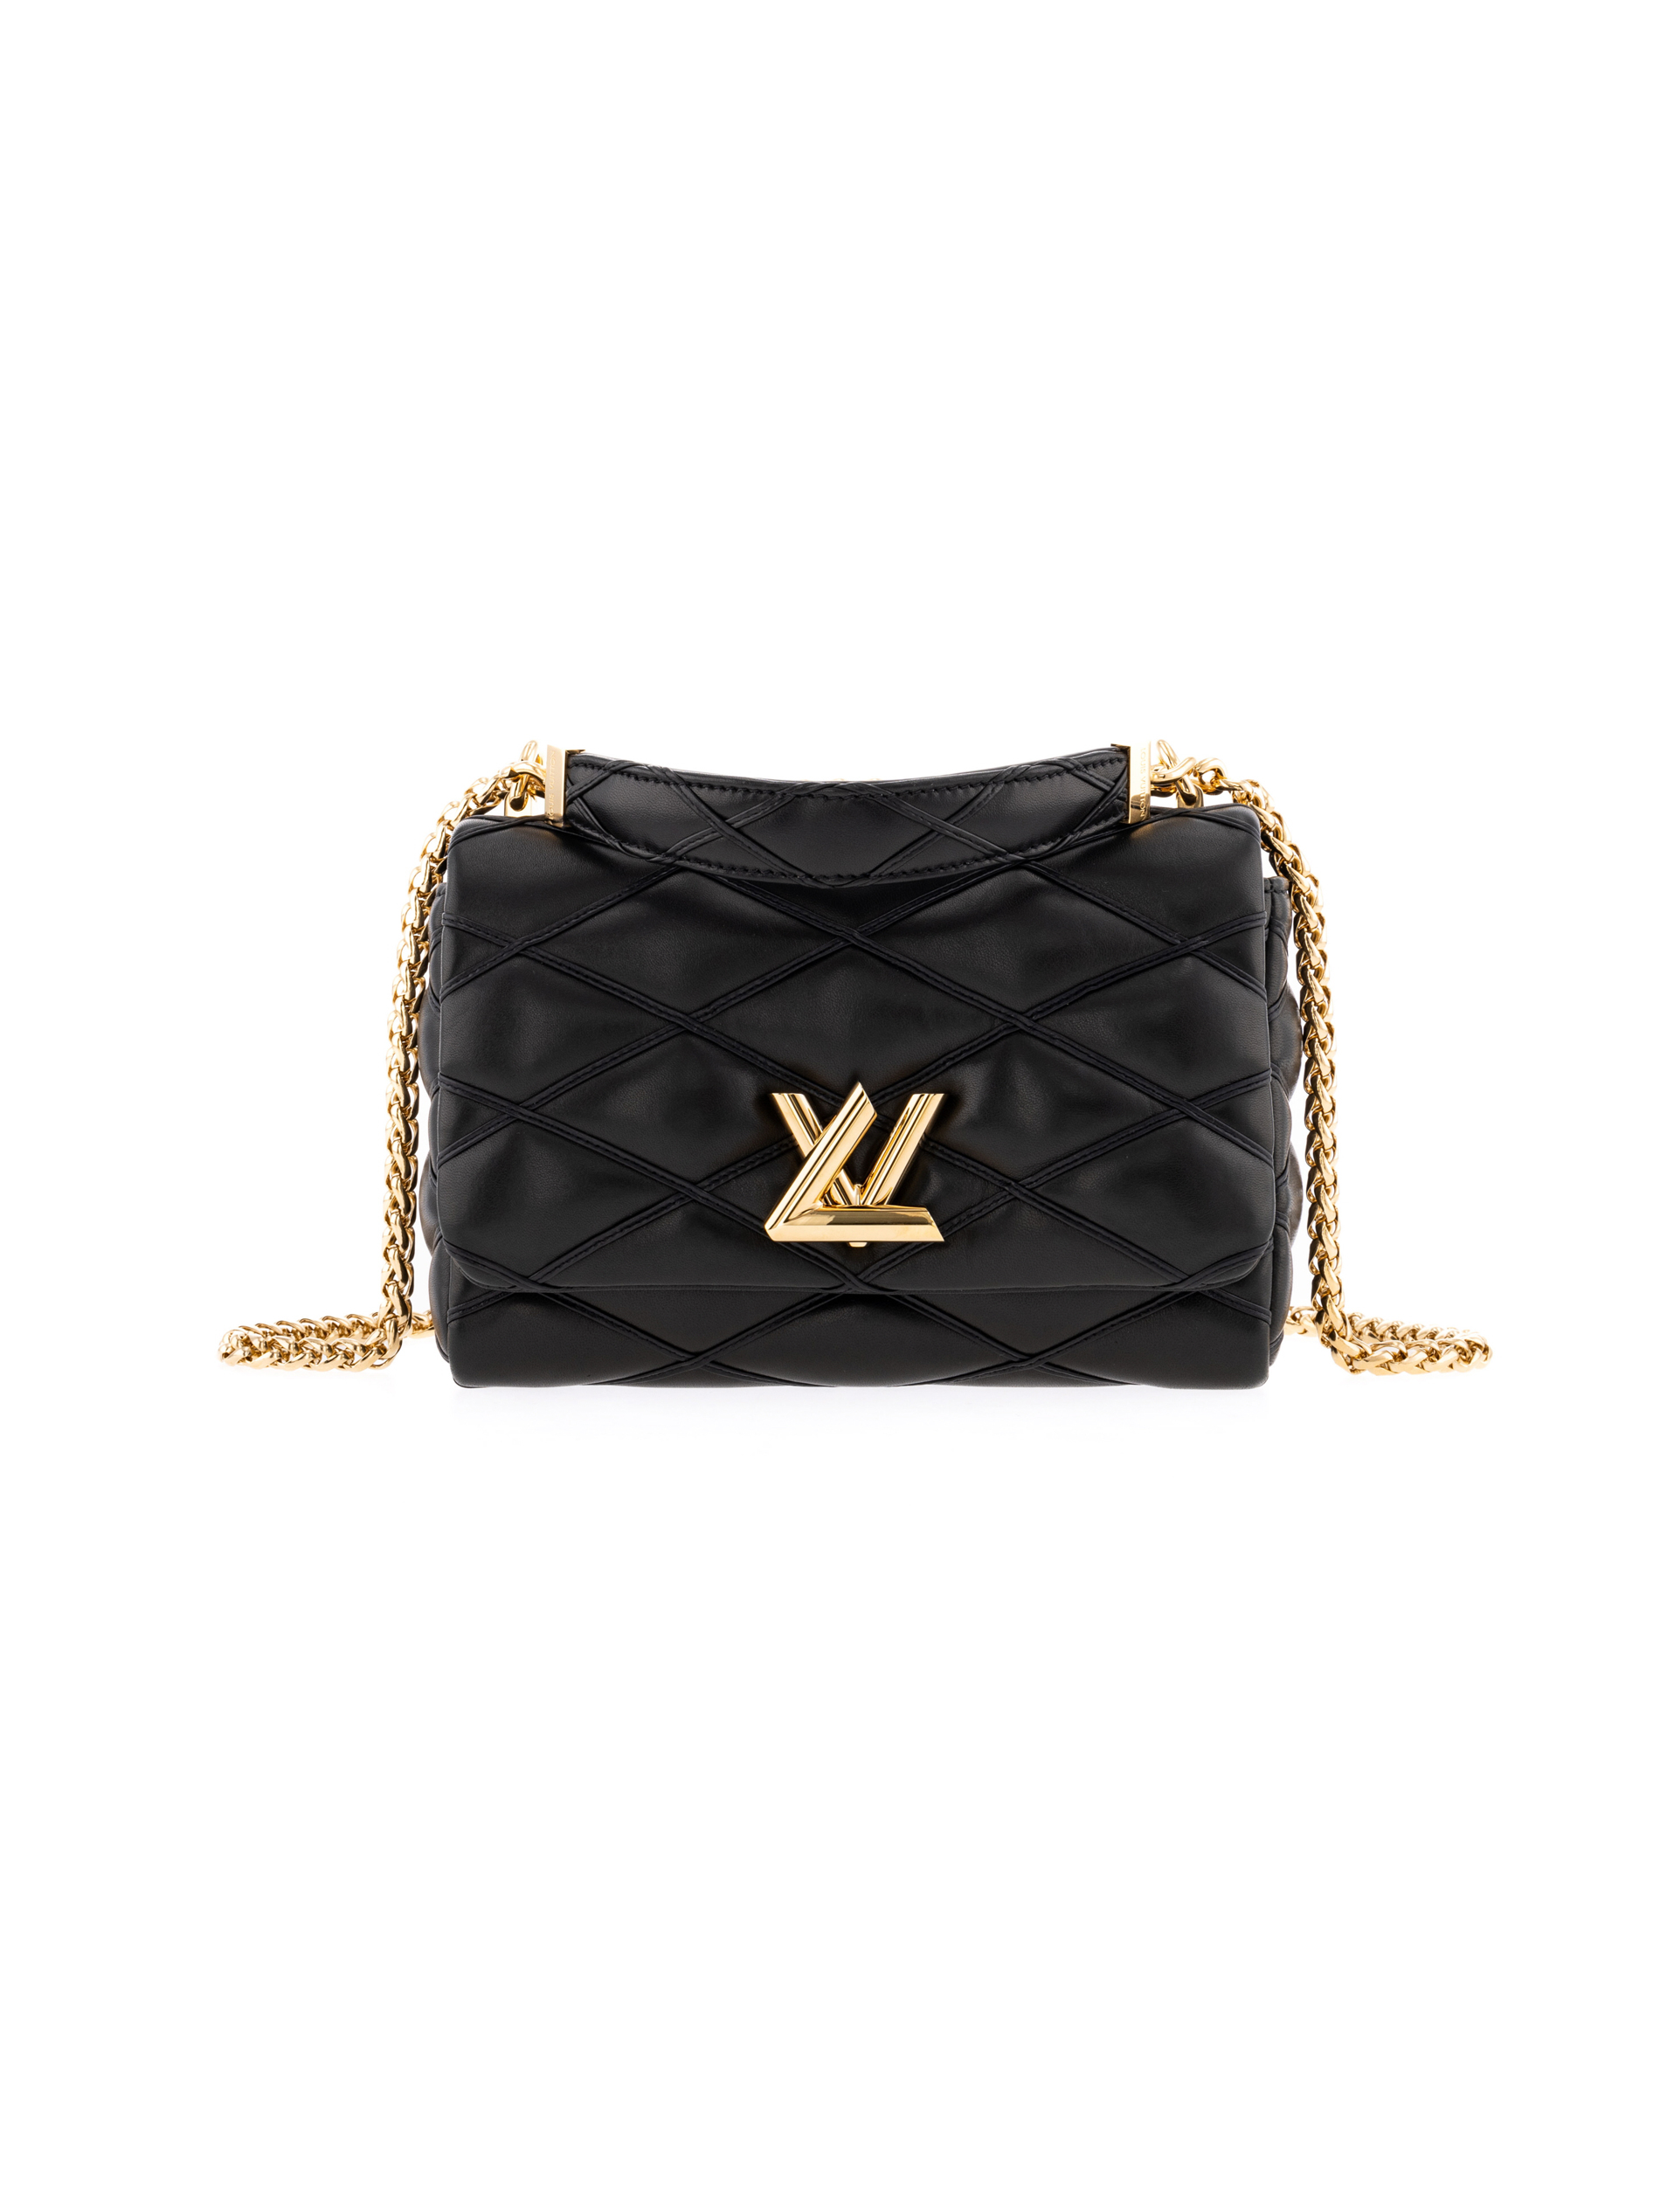 Louis Vuitton Just Dropped The Bag Of The Season: The GO-14 Bag